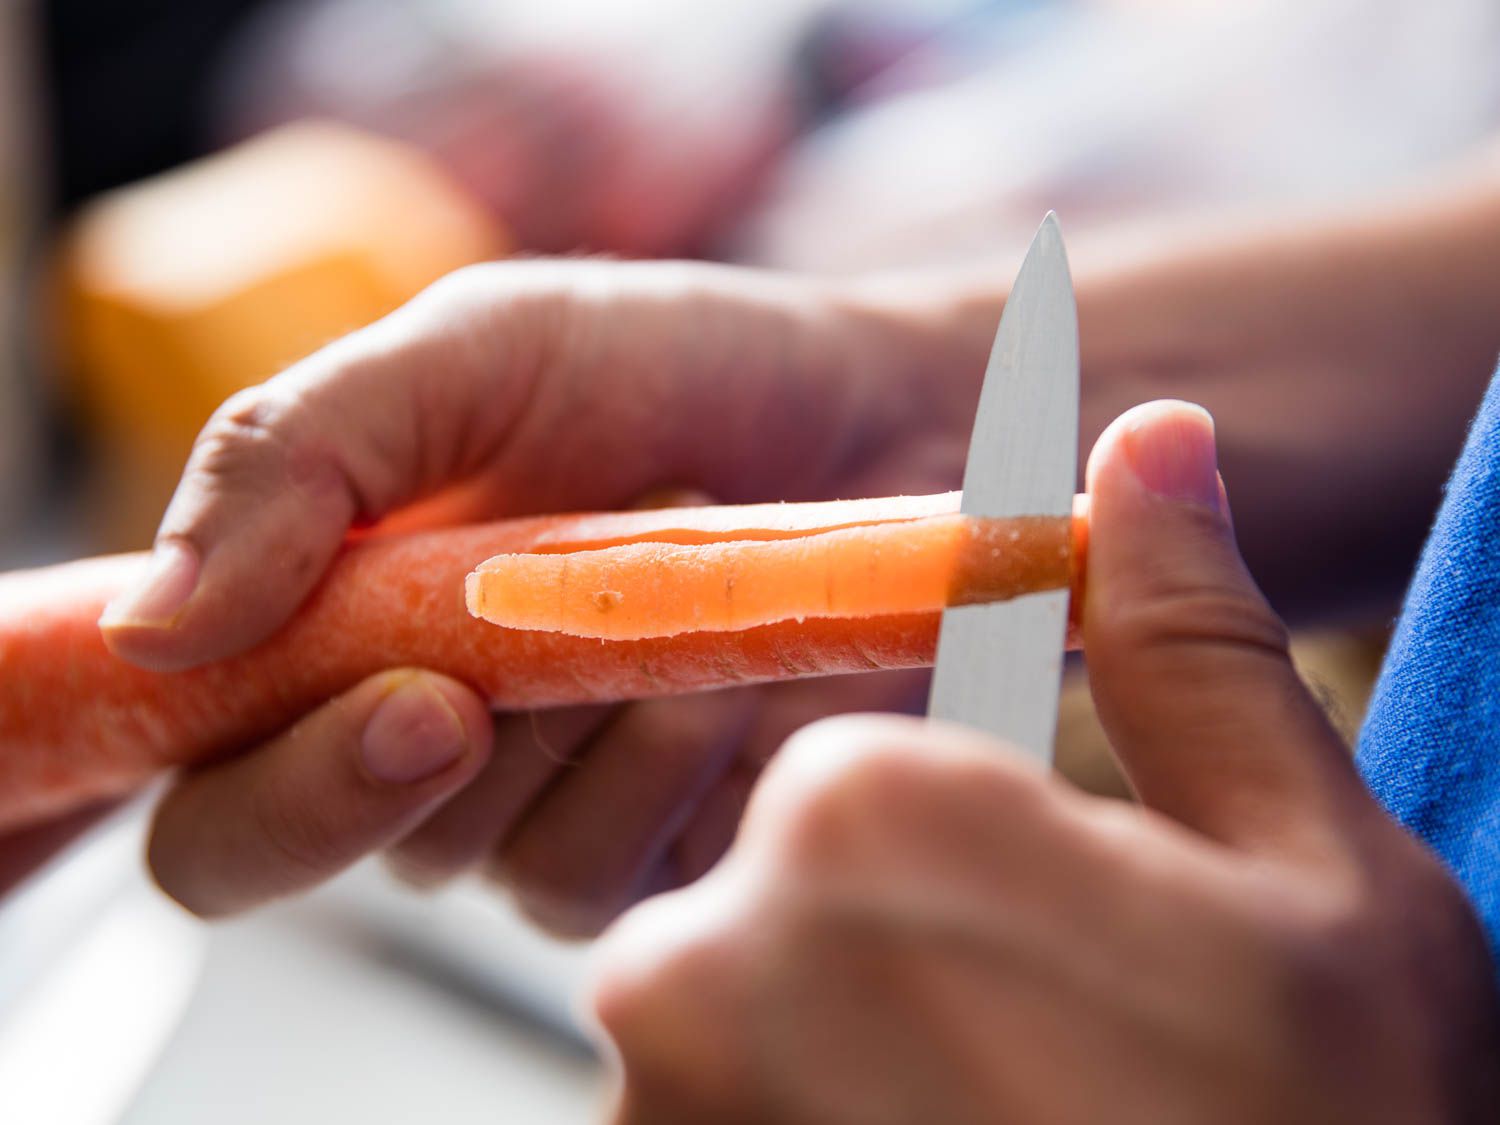 A pairing knife peeling a carrot